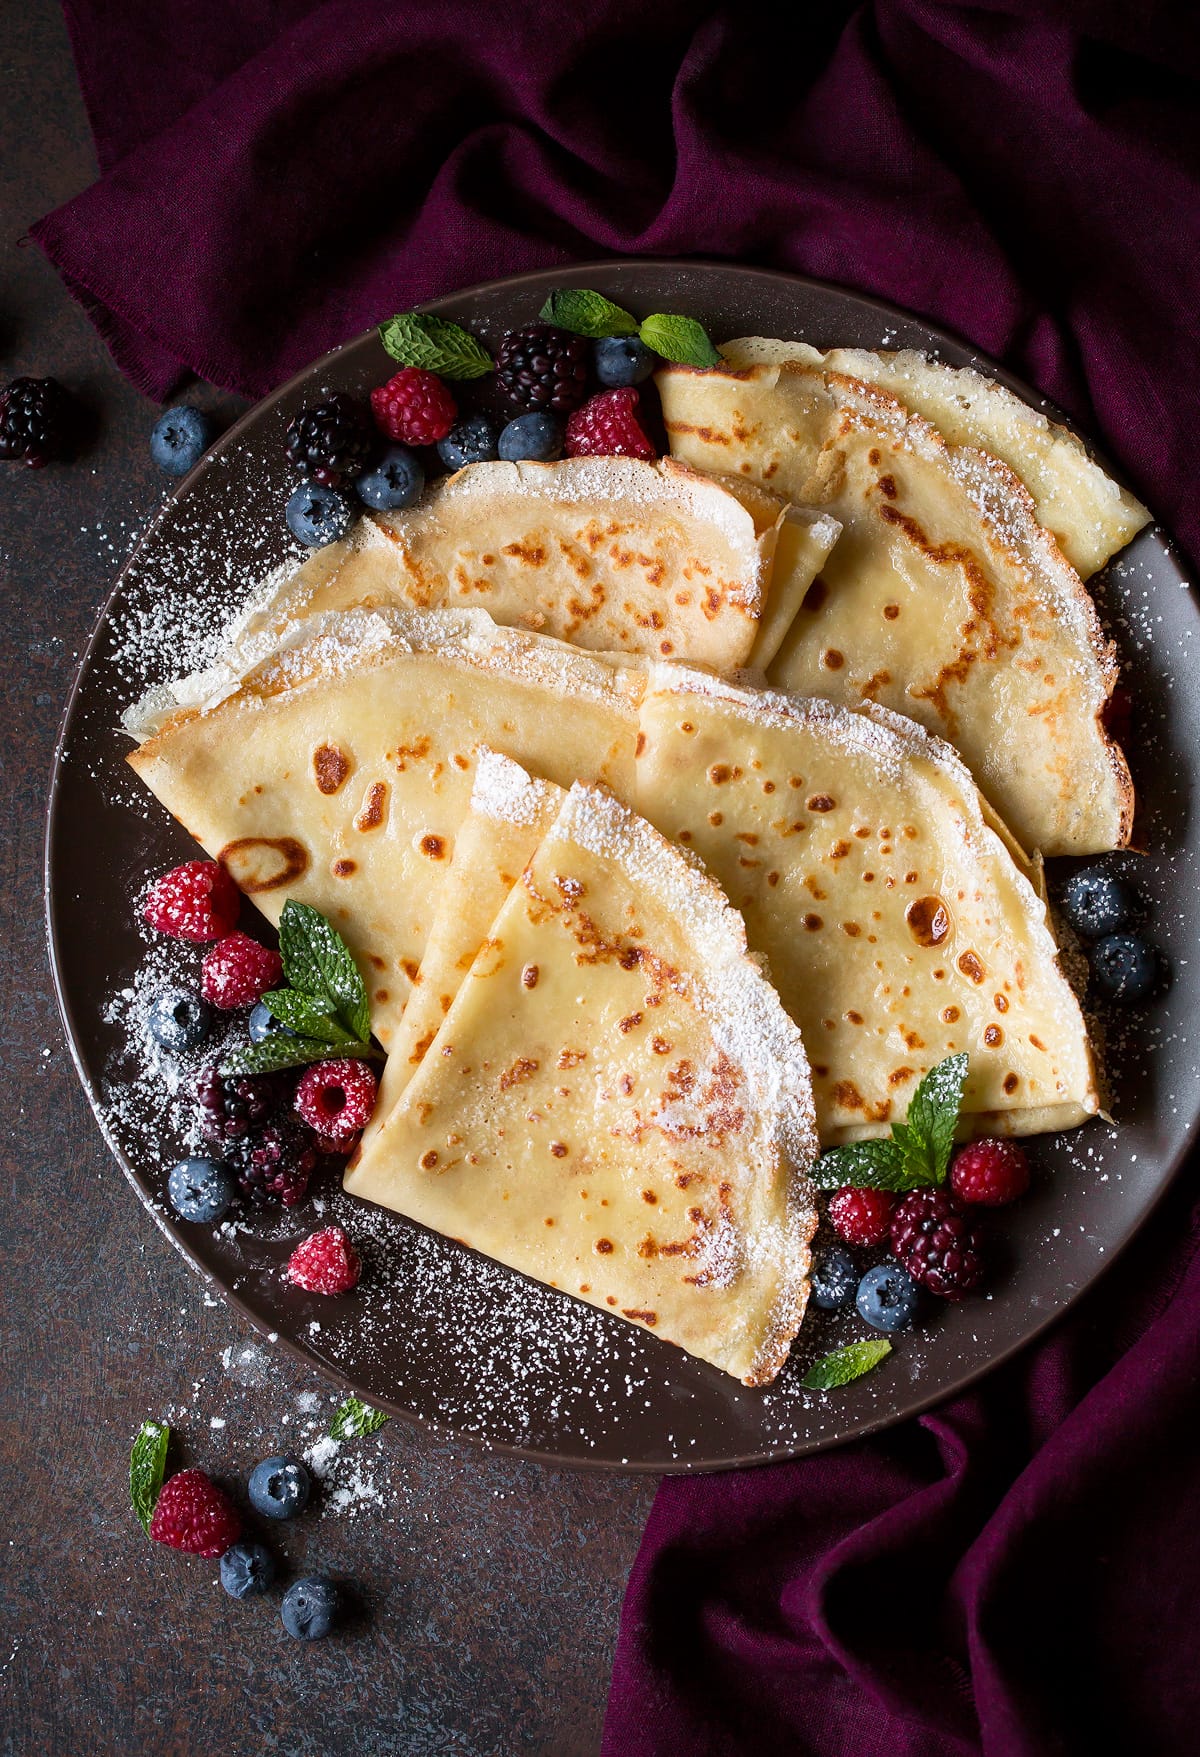 Overhead image of plate full of folded crepes on a dark plate set over a maroon napkin.